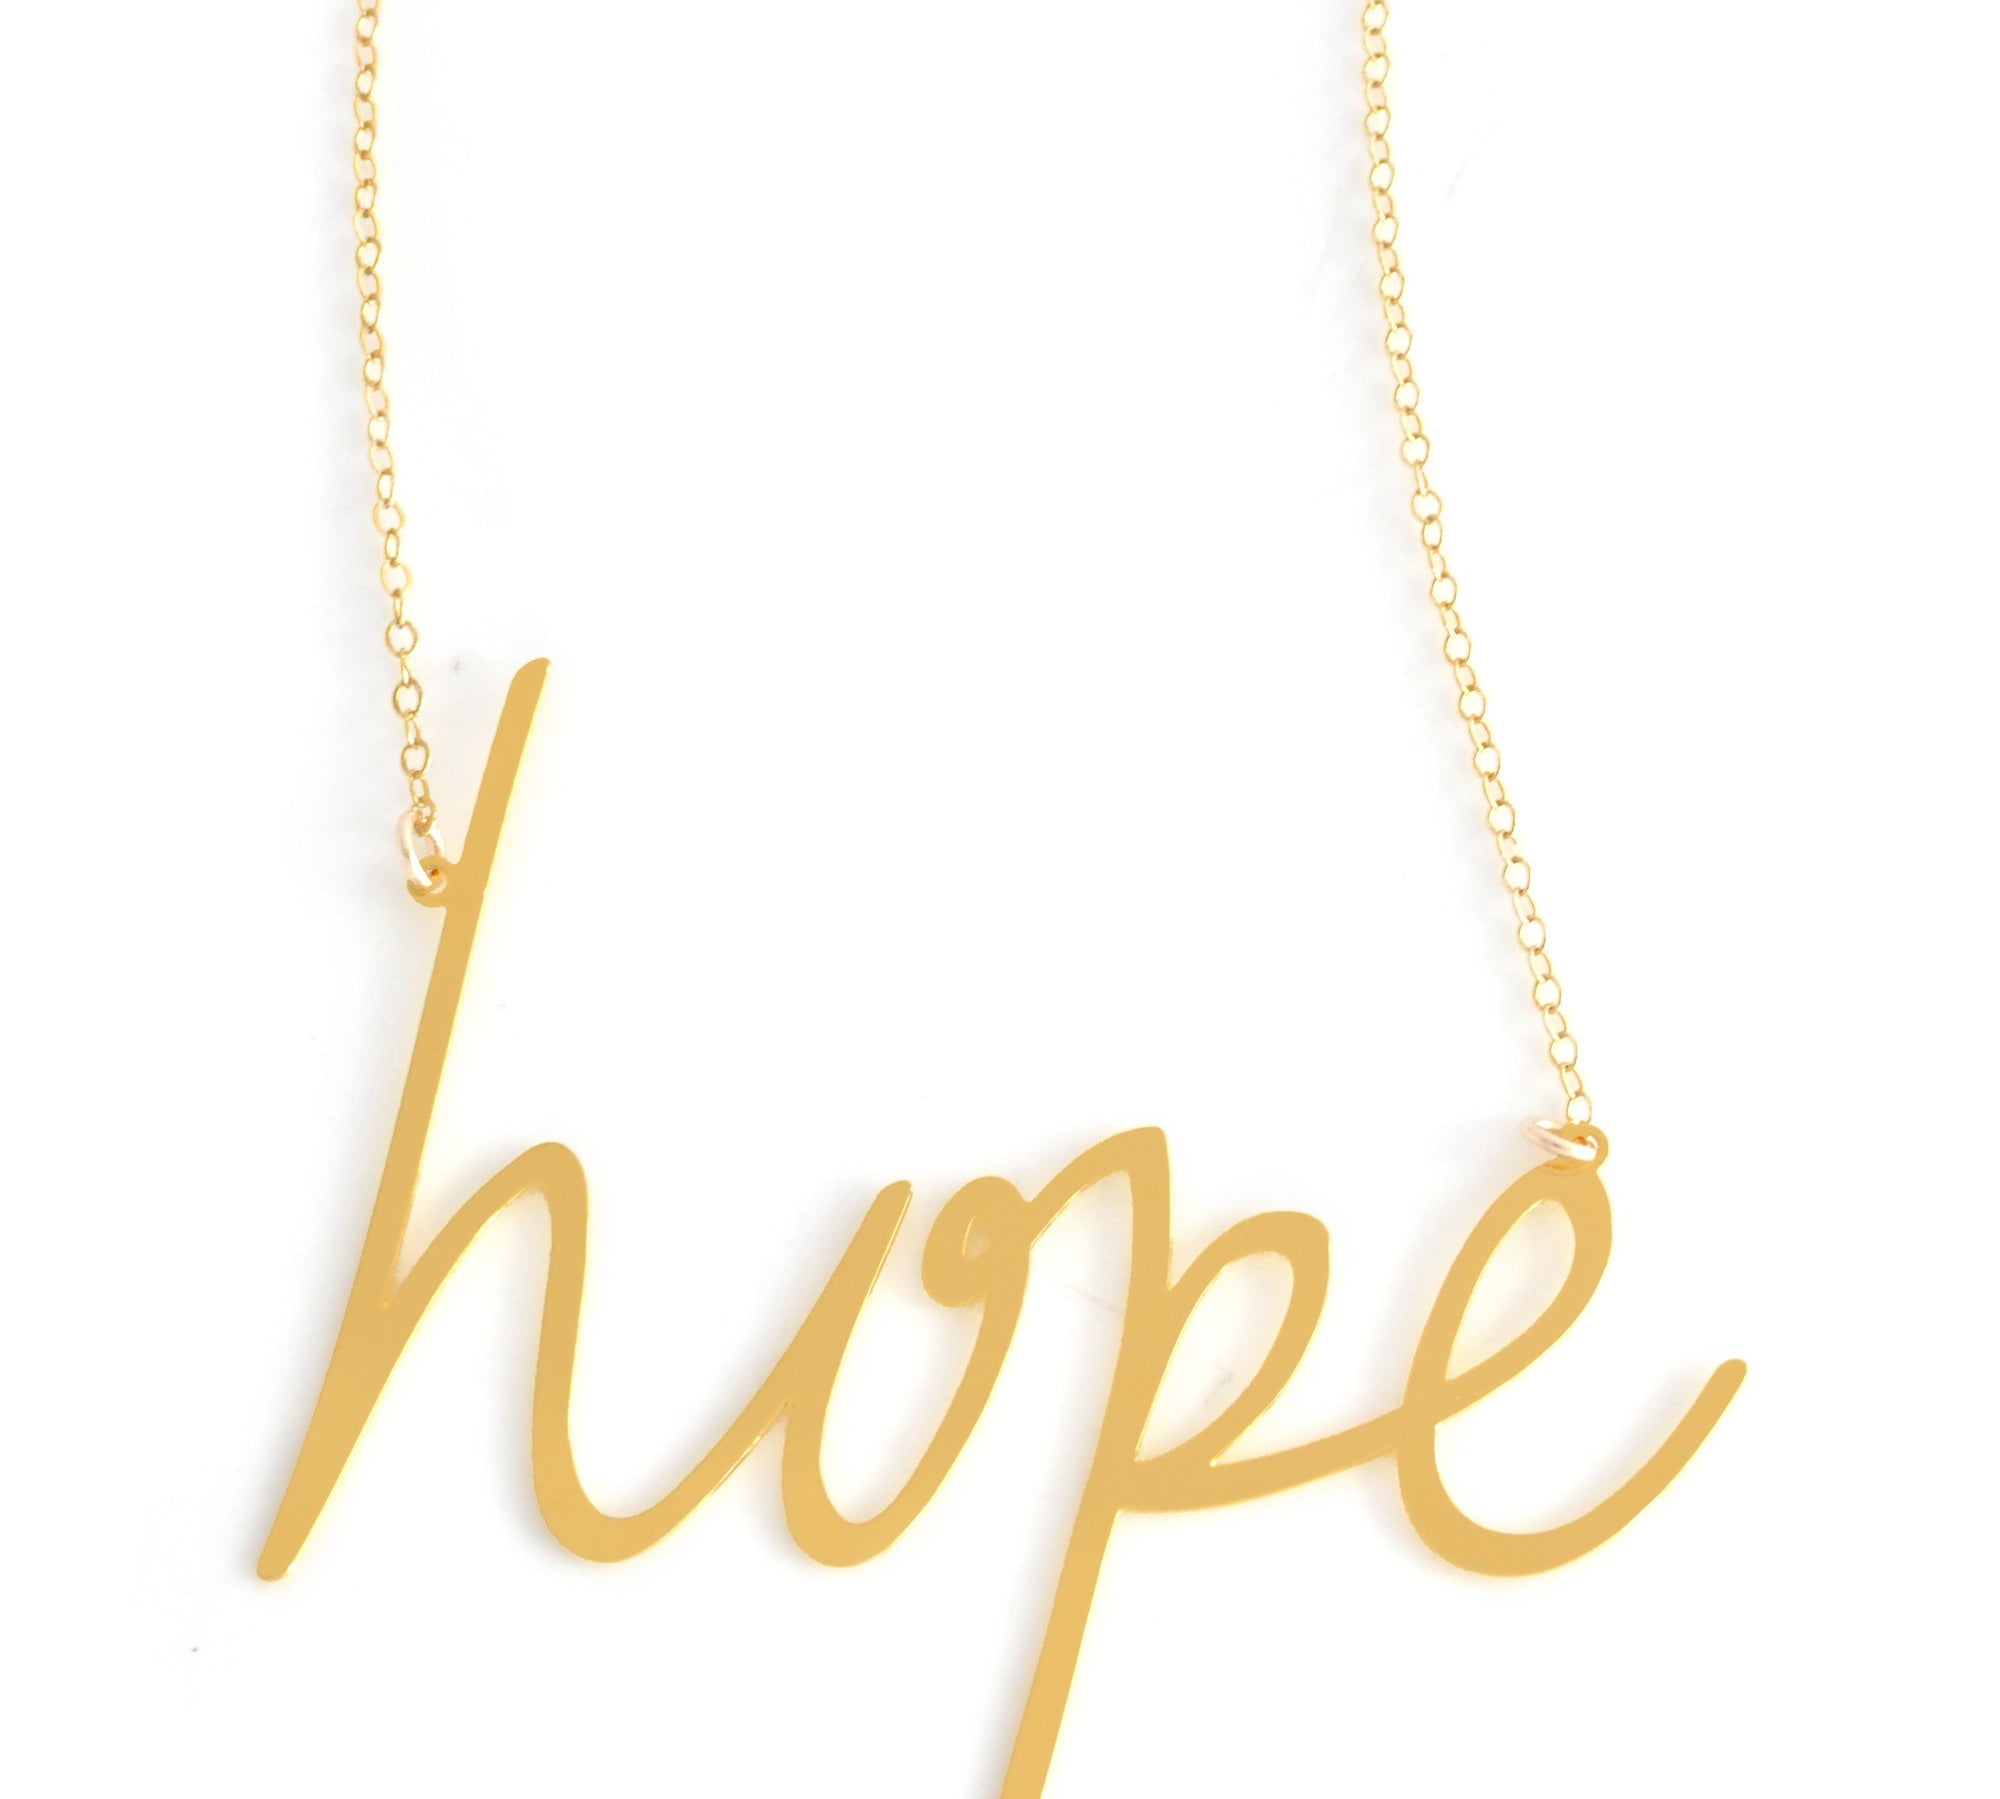 Hope Necklace - High Quality, Affordable, Hand Written, Self Love, Mantra Word Necklace - Available in Gold and Silver - Small and Large Sizes - Made in USA - Brevity Jewelry